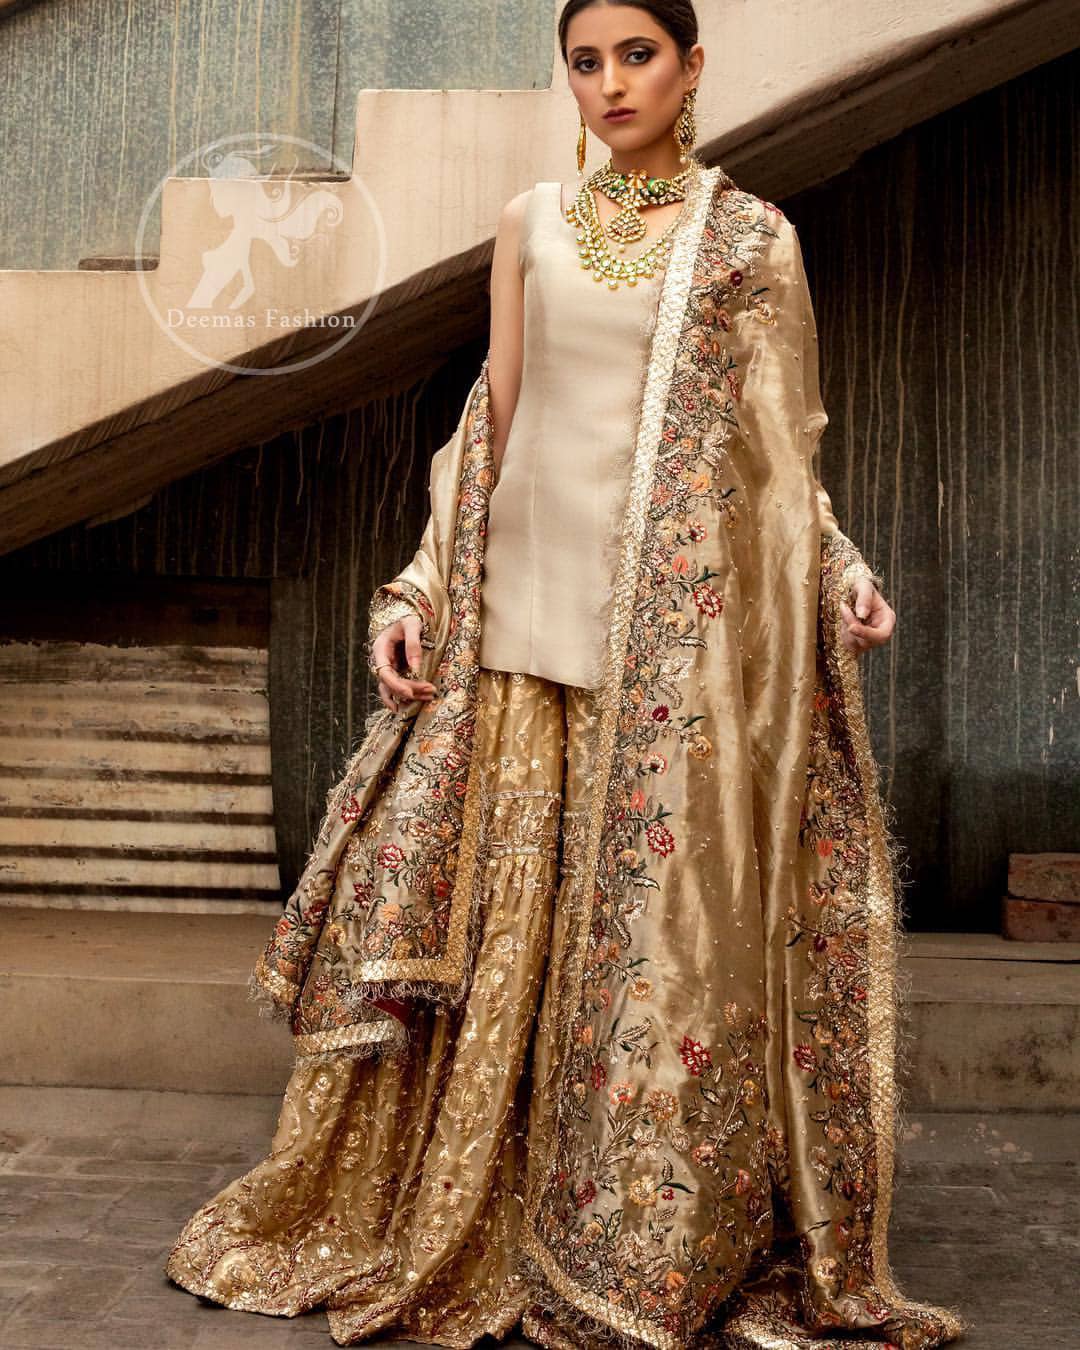 Ivory plain shirt is paired up with golden traditional gharara done with floral motifs all over. It is beautifully matched with golden dupatta with colorful embellished motifs at both lengths and lace border finished around dupatta.